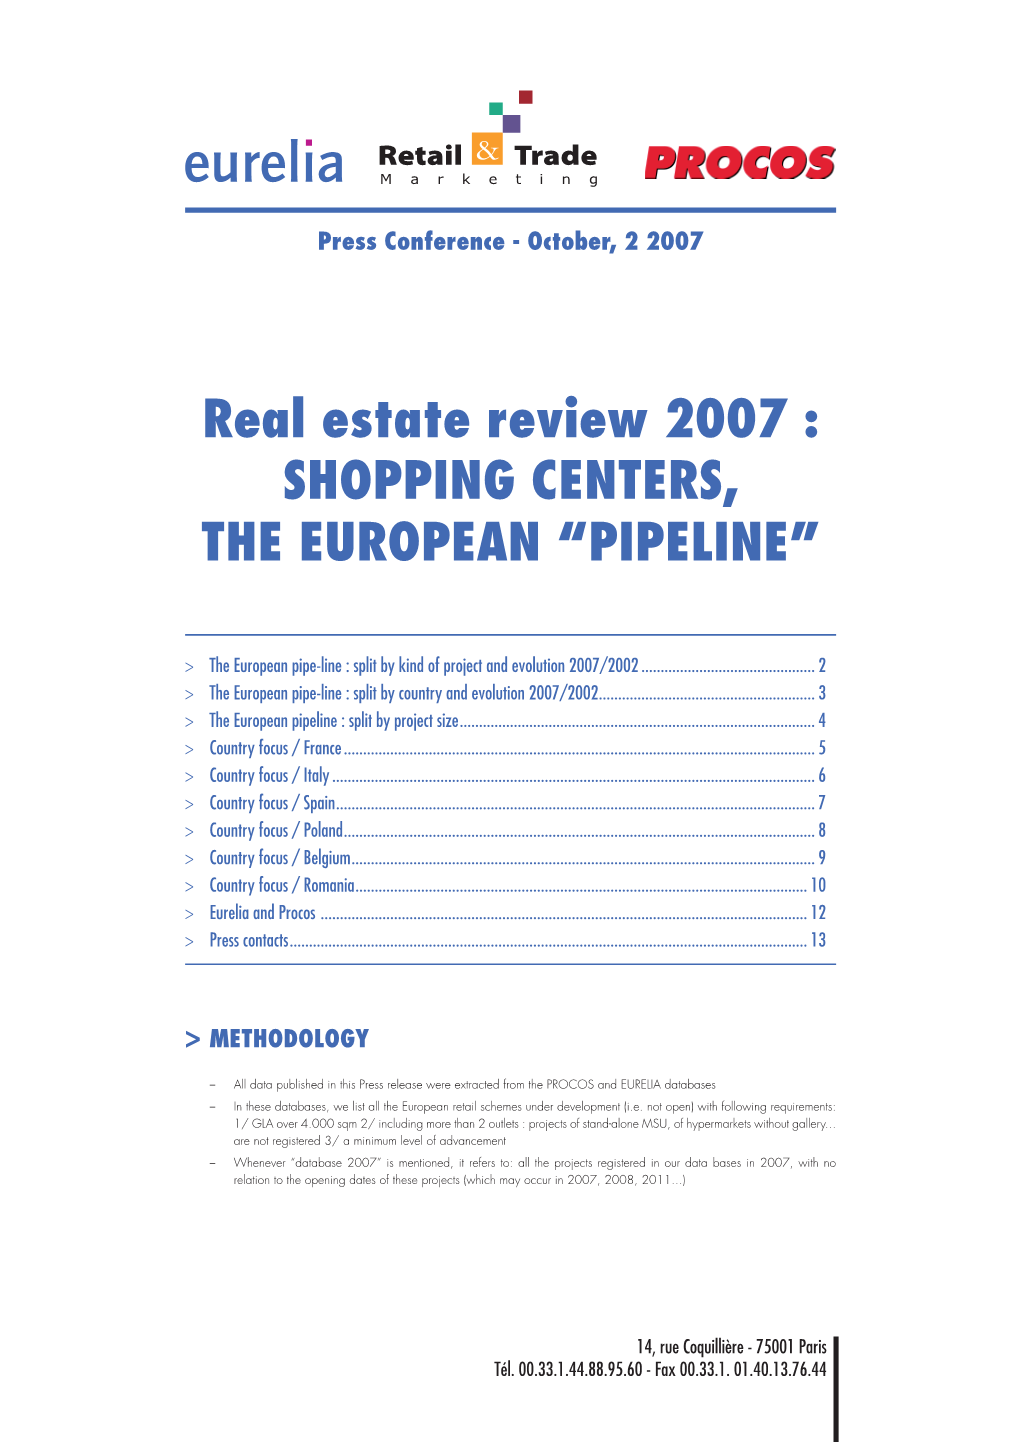 Real Estate Review 2007 : SHOPPING CENTERS, the EUROPEAN “PIPELINE”